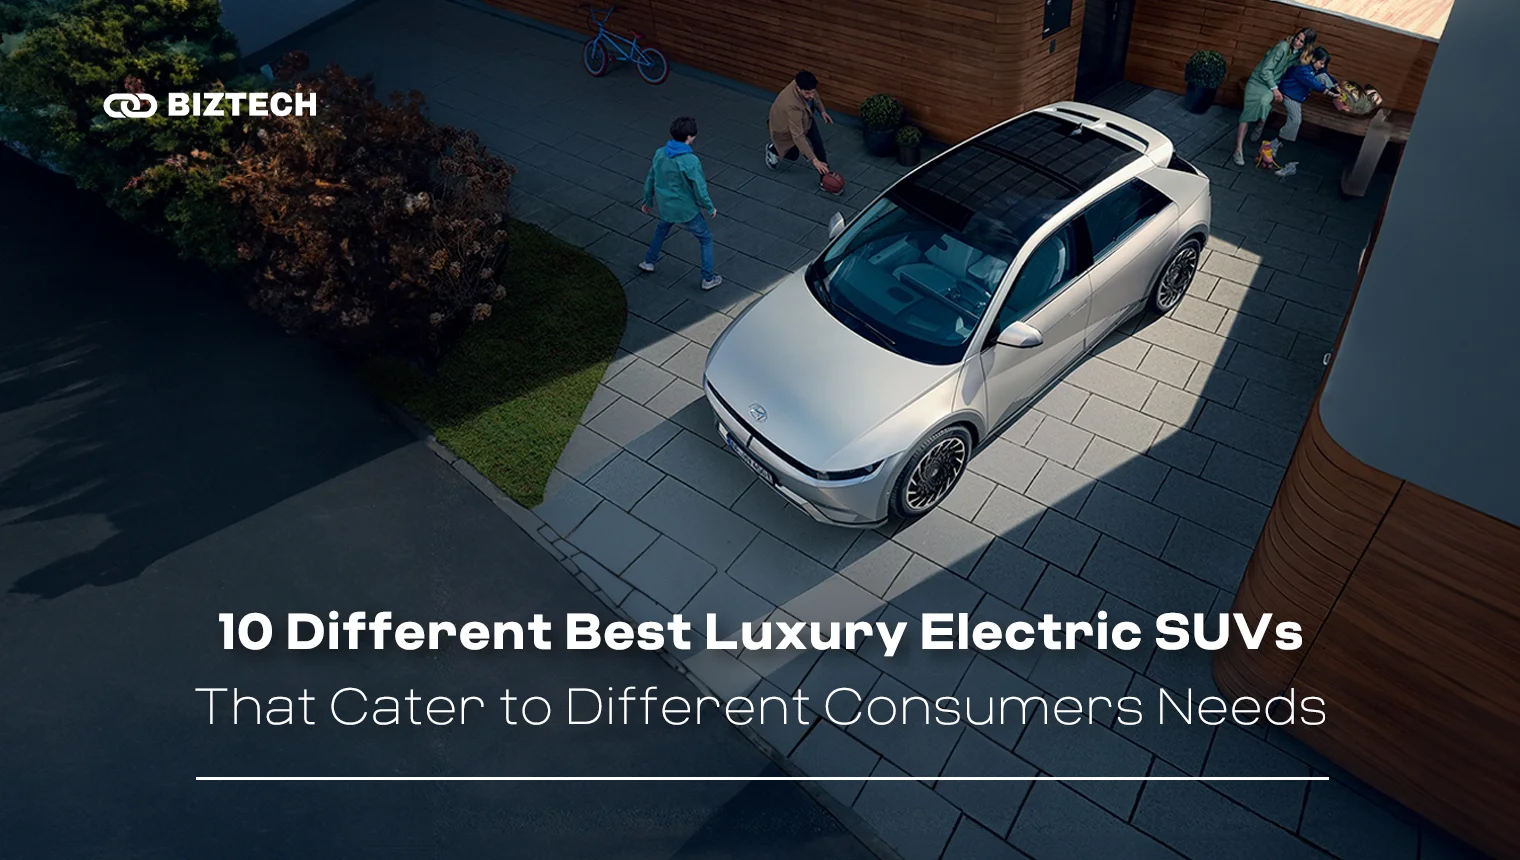 10 Different Best Luxury Electric SUVs That Cater to Different Consumers’ Needs